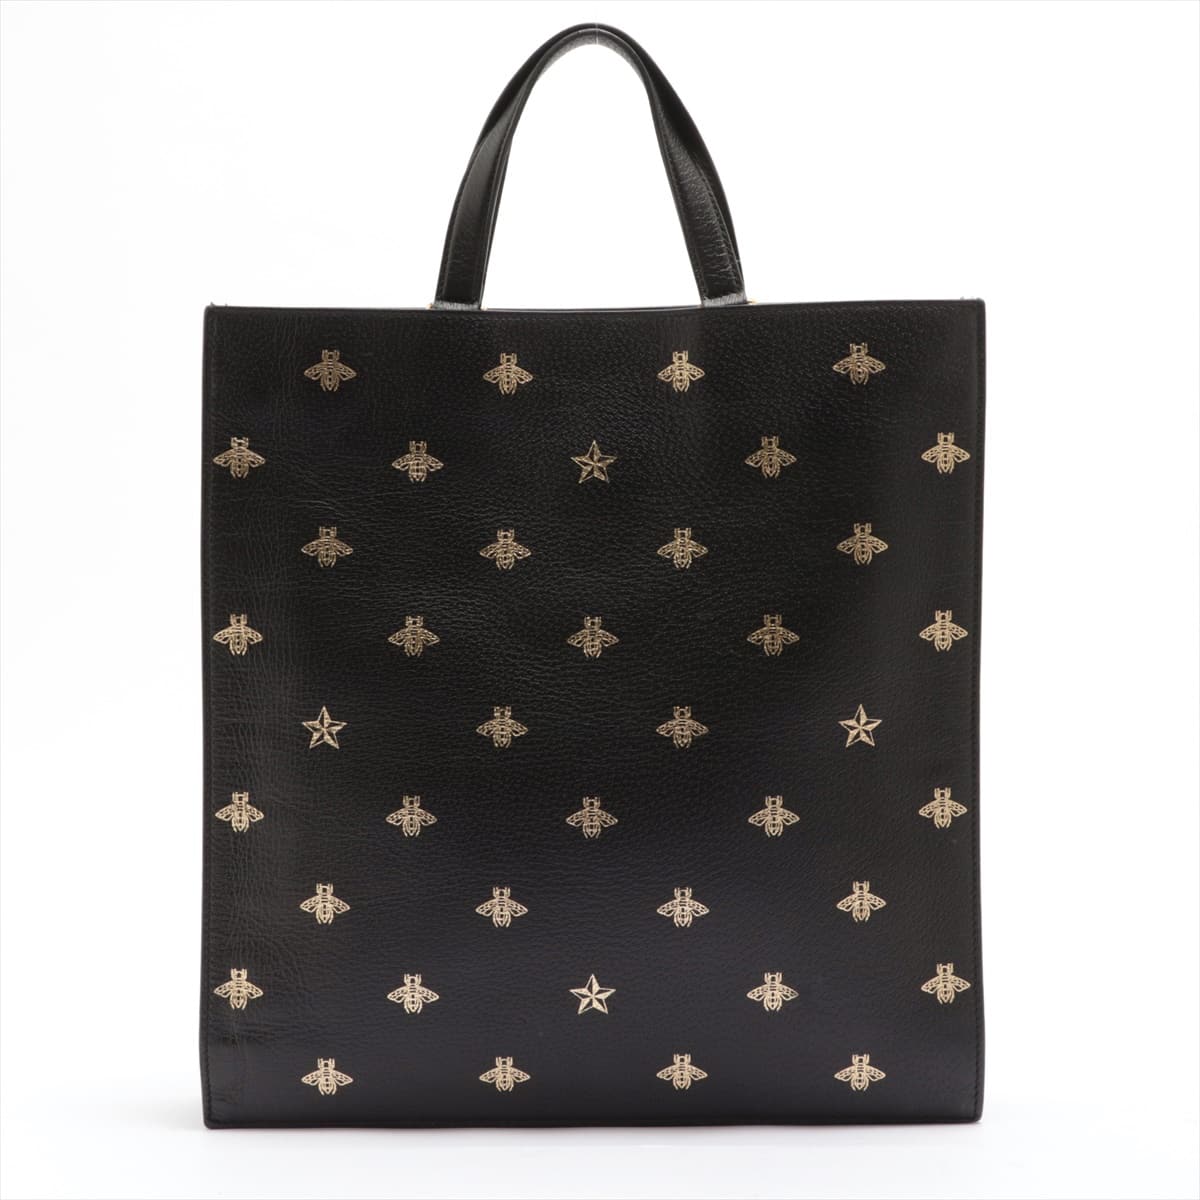 Gucci Bee Star Leather Tote bag Black 495444